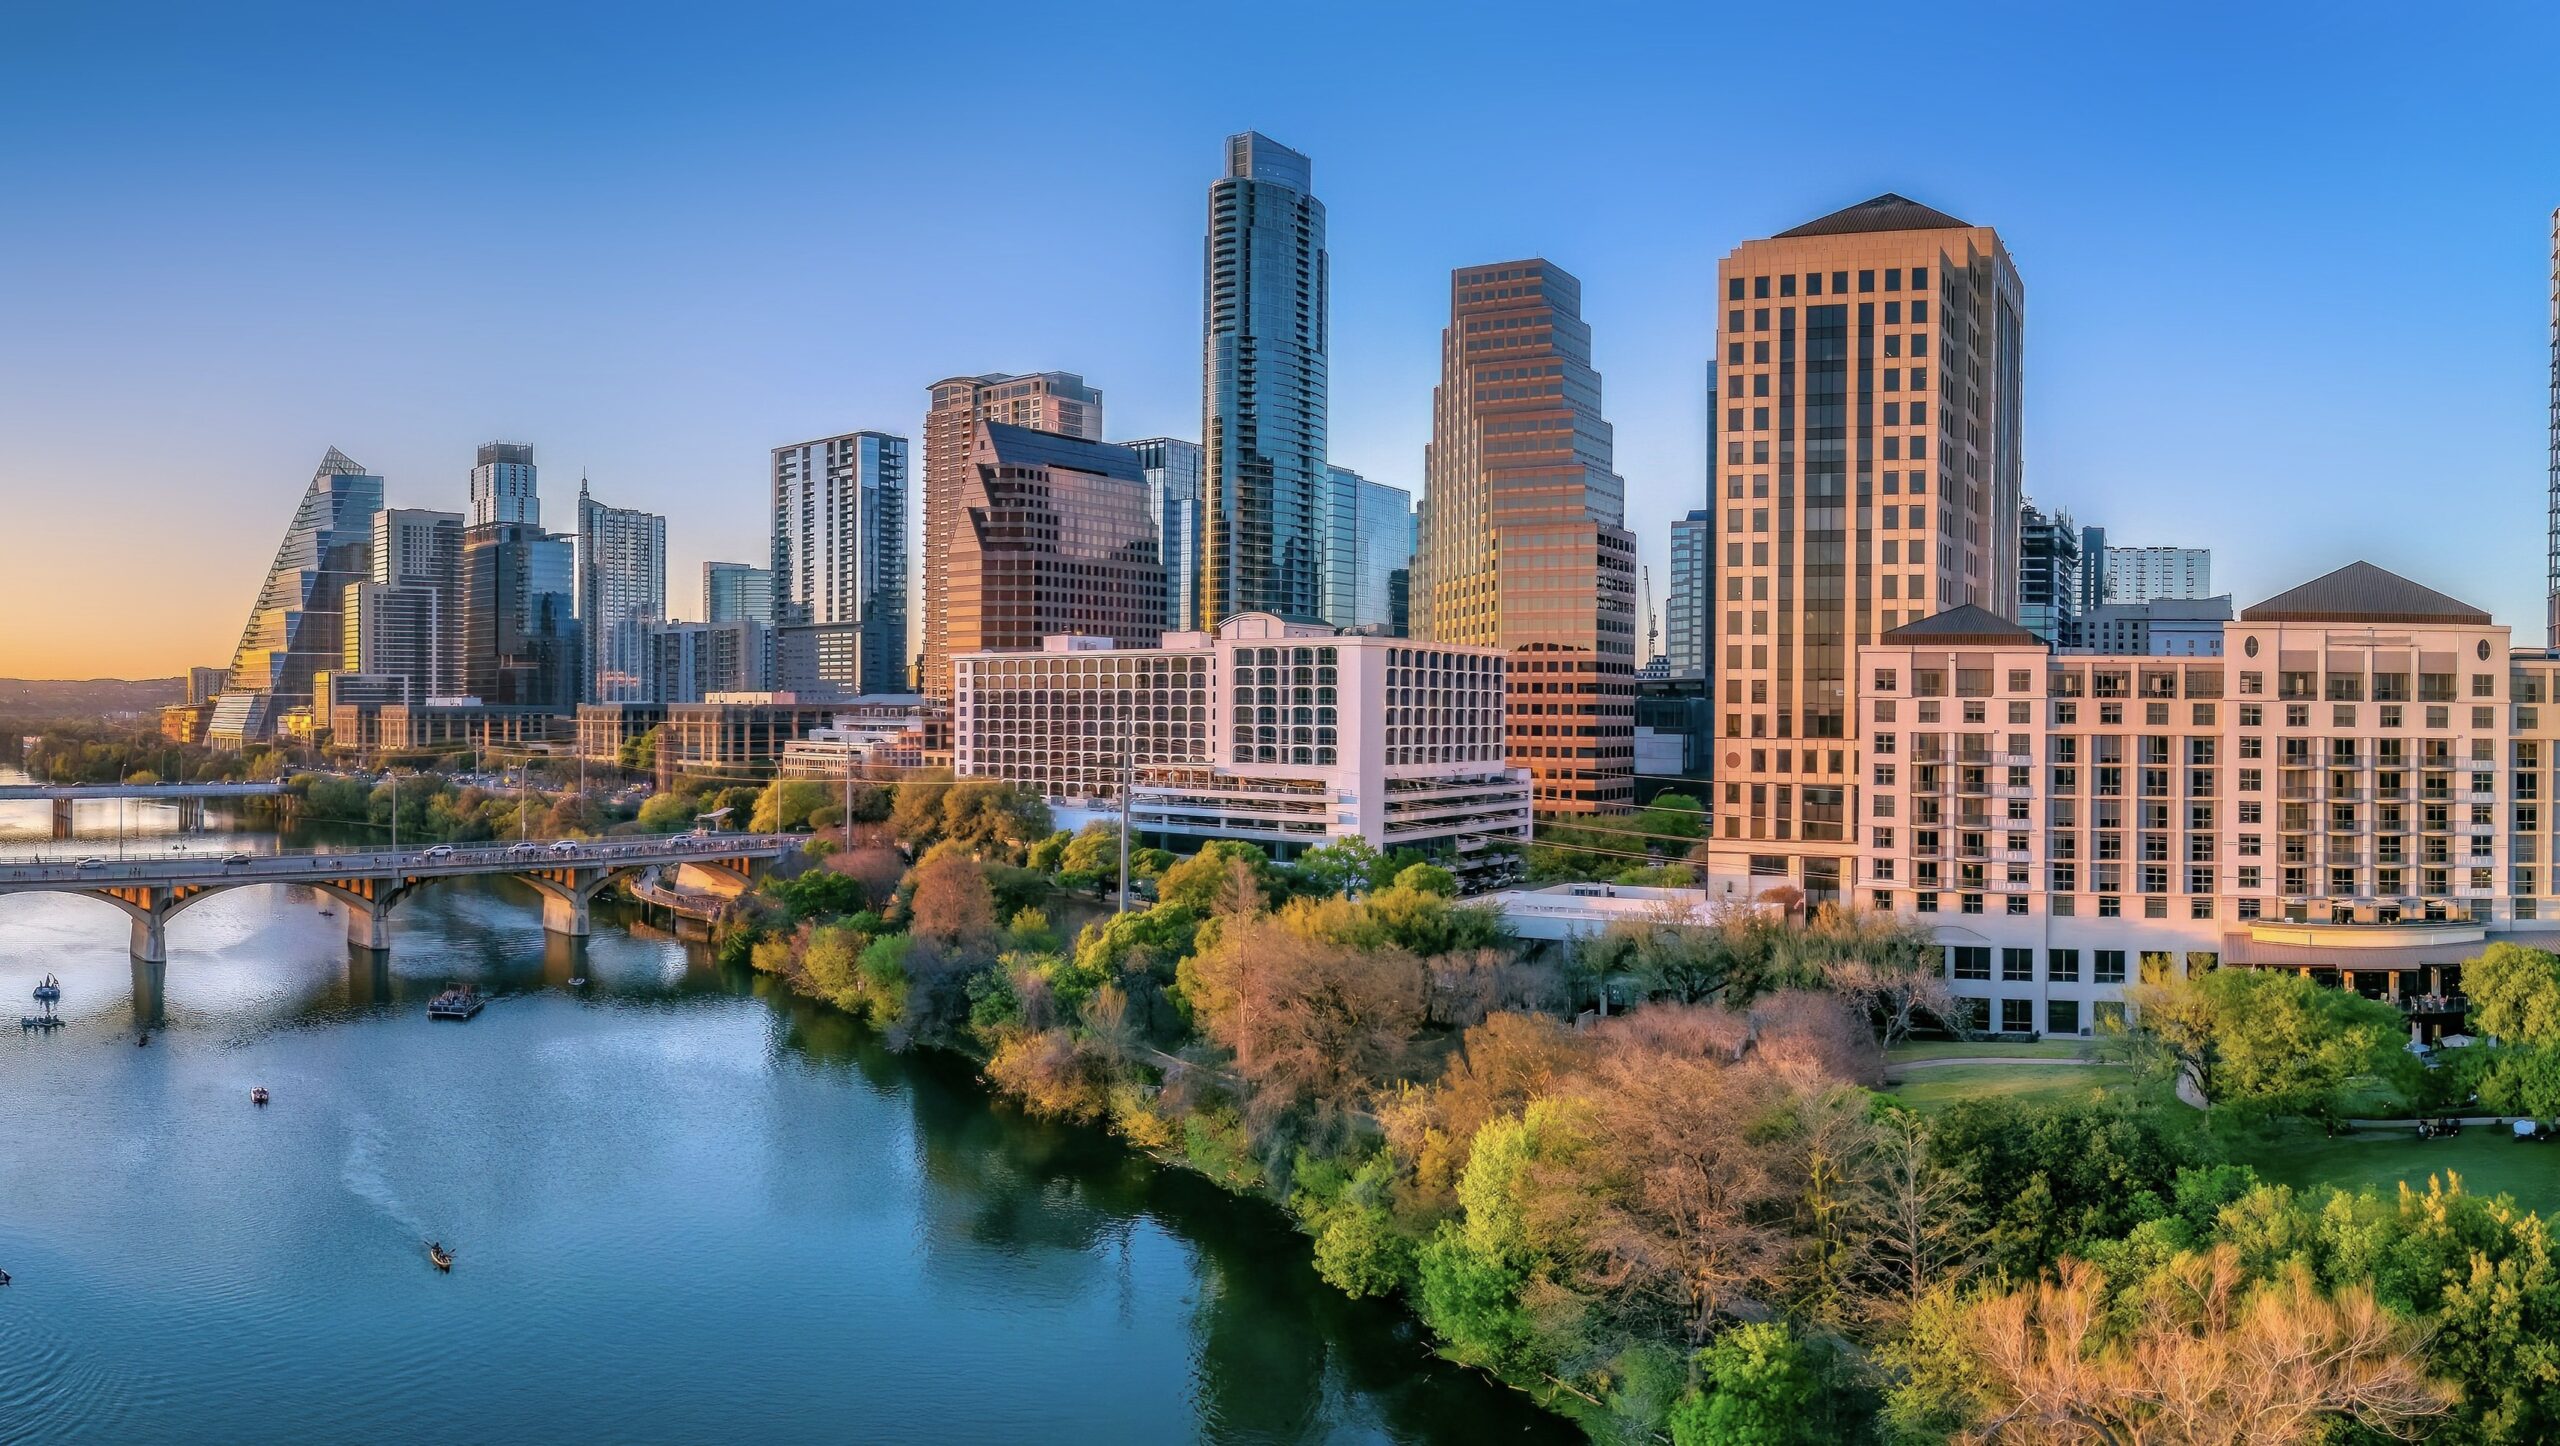 Air Canada has launched nonstop flights from Montreal to Austin, Texas